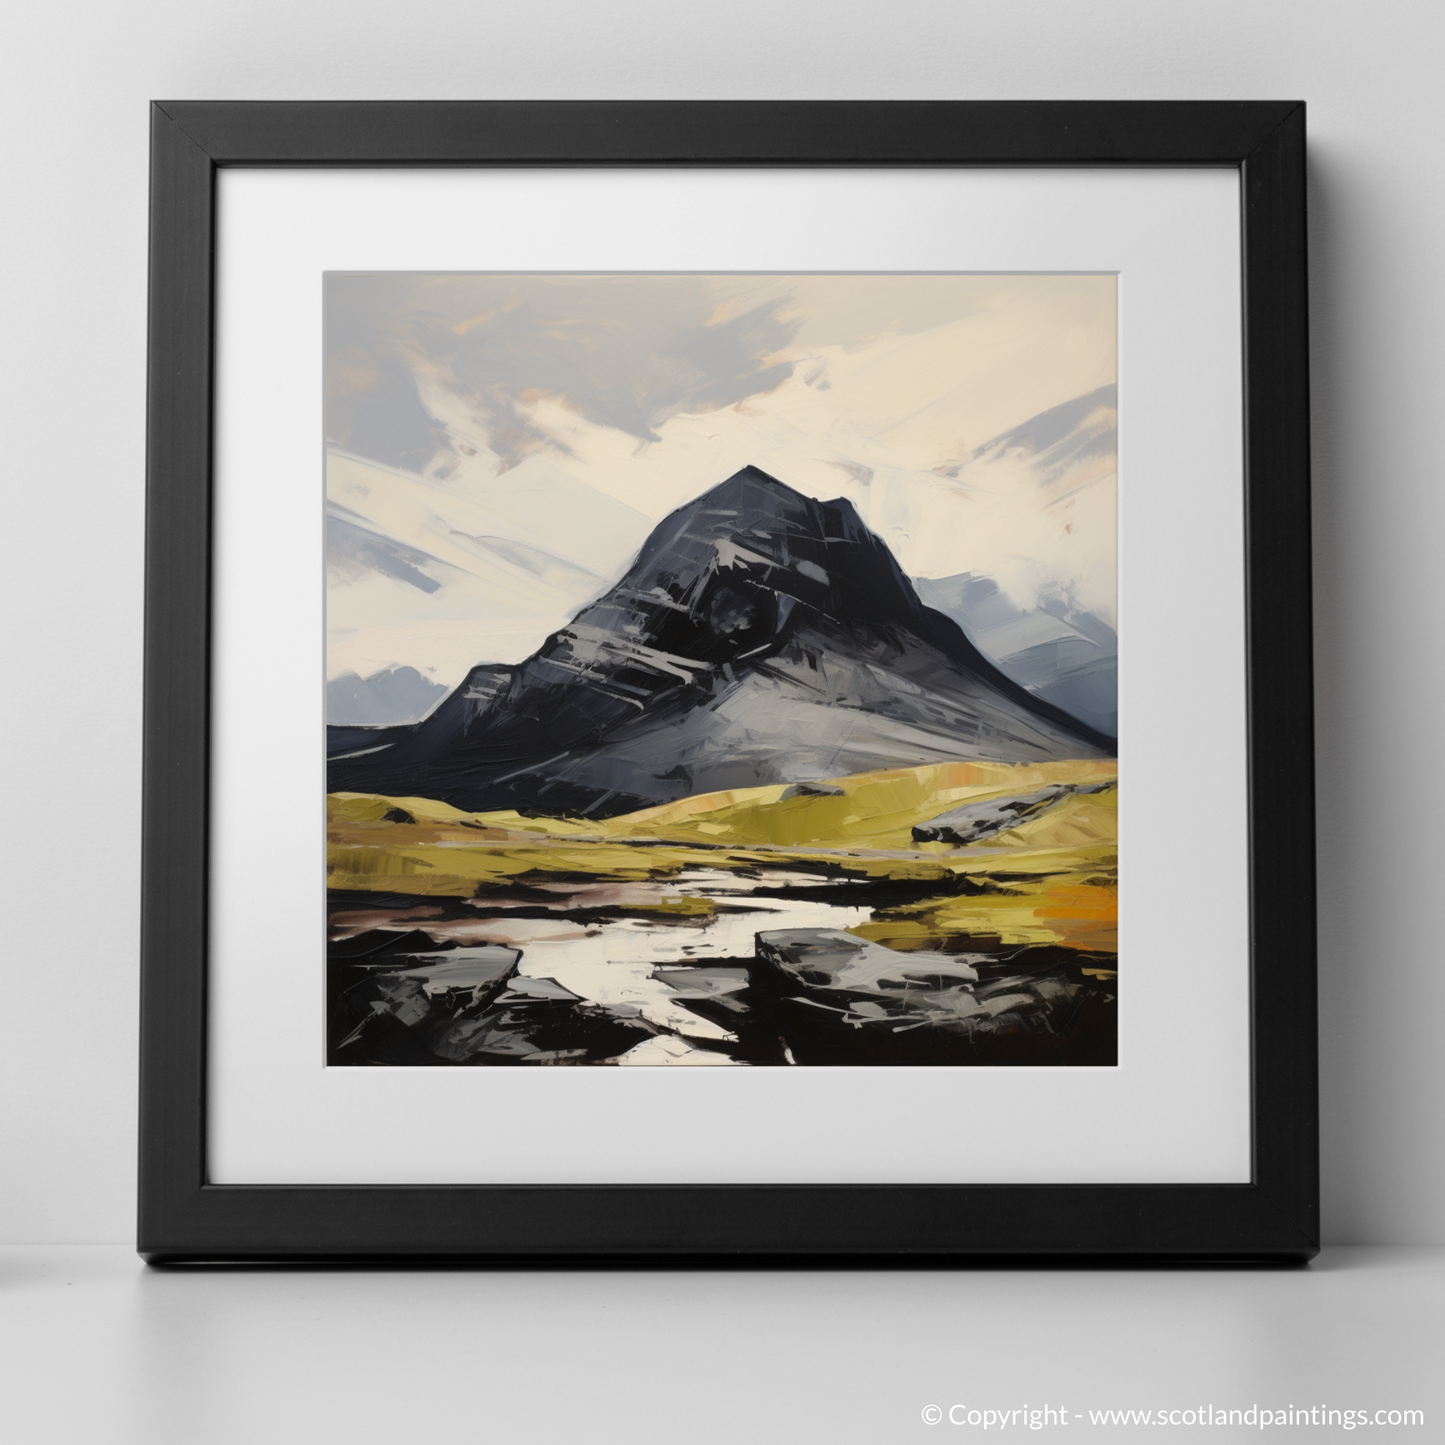 Art Print of Ben More Assynt, Sutherland with a black frame